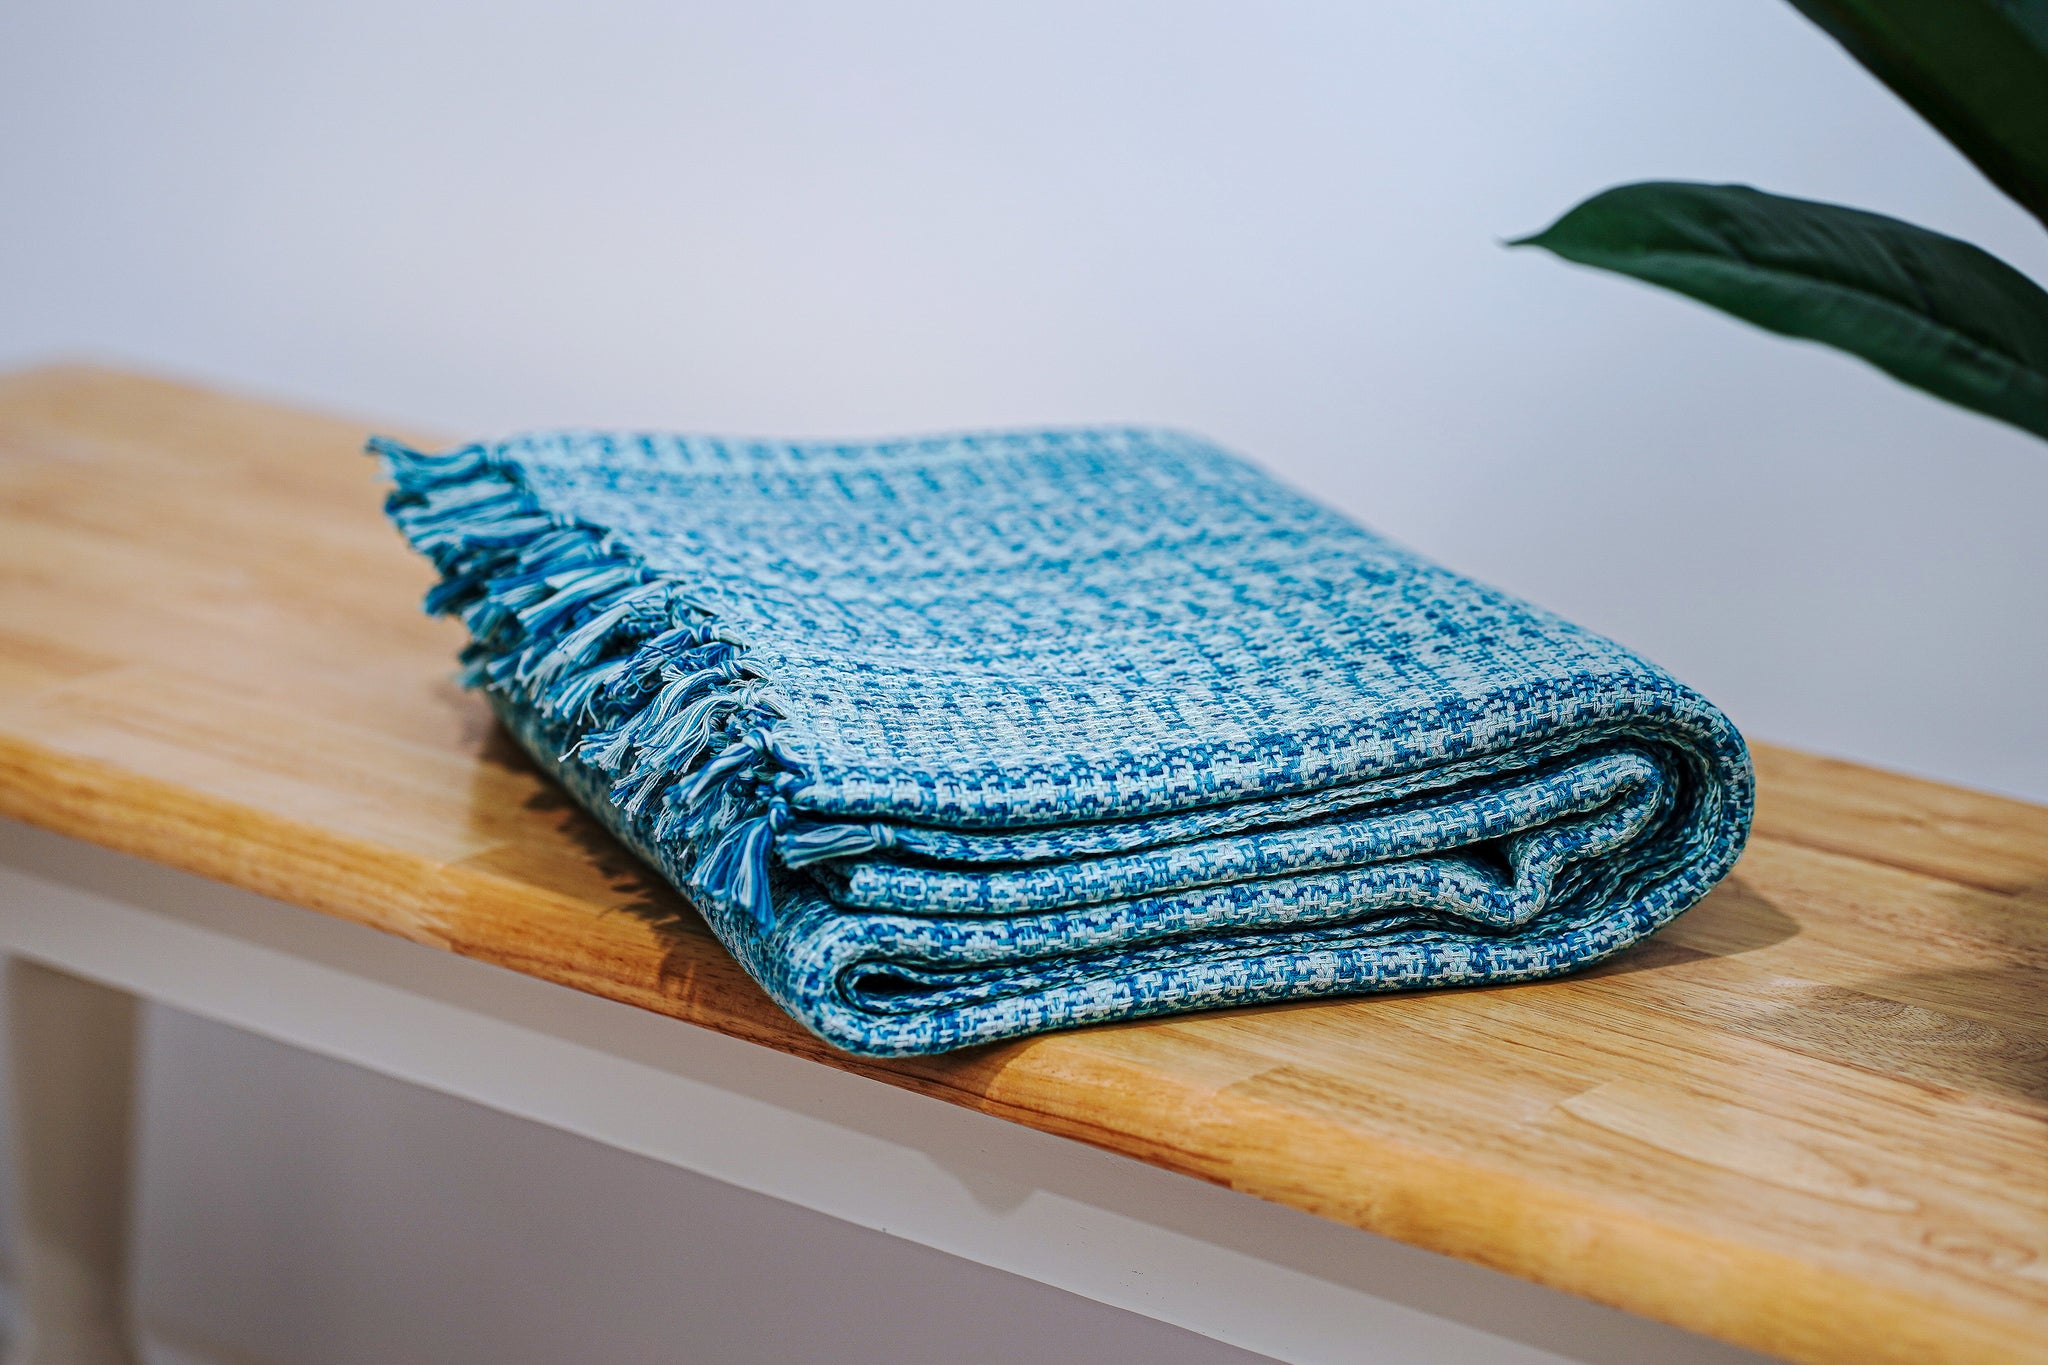 Handwoven throw blanket, 100% cotton with all natural dyes that brings comfort and style to your home.